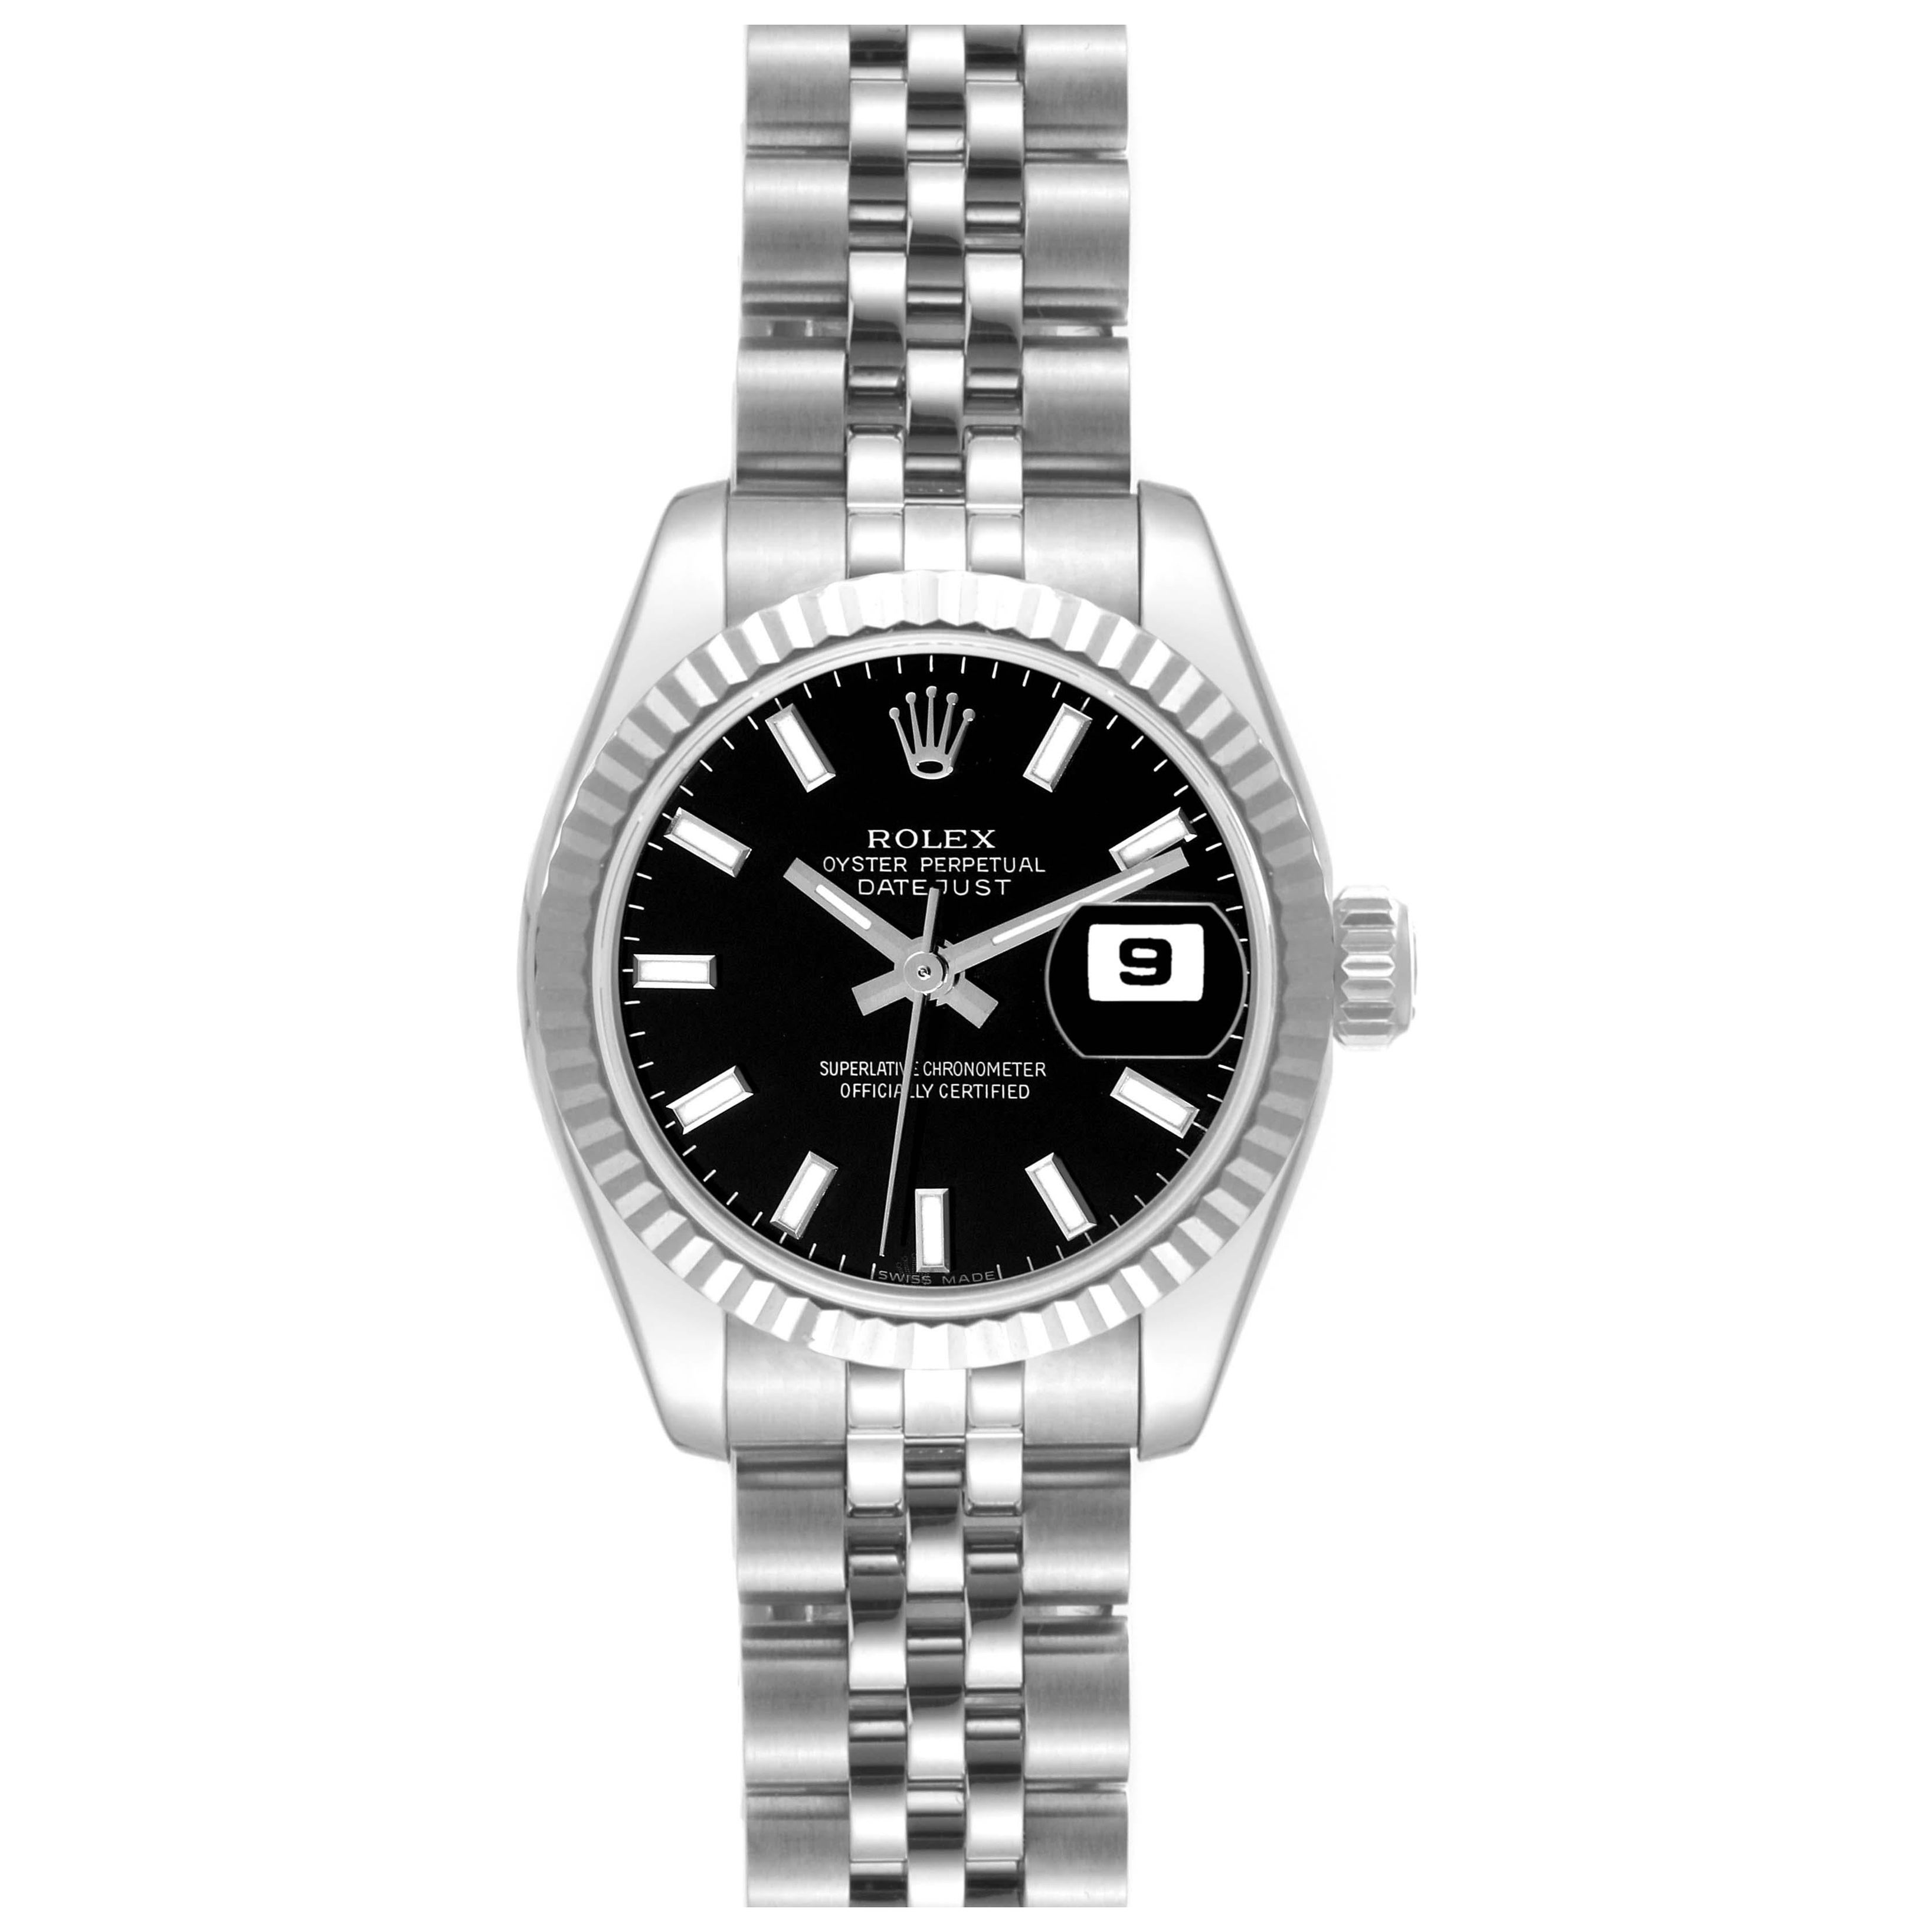 Rolex Datejust Steel White Gold Black Dial Ladies Watch 179174 Box Papers For Sale